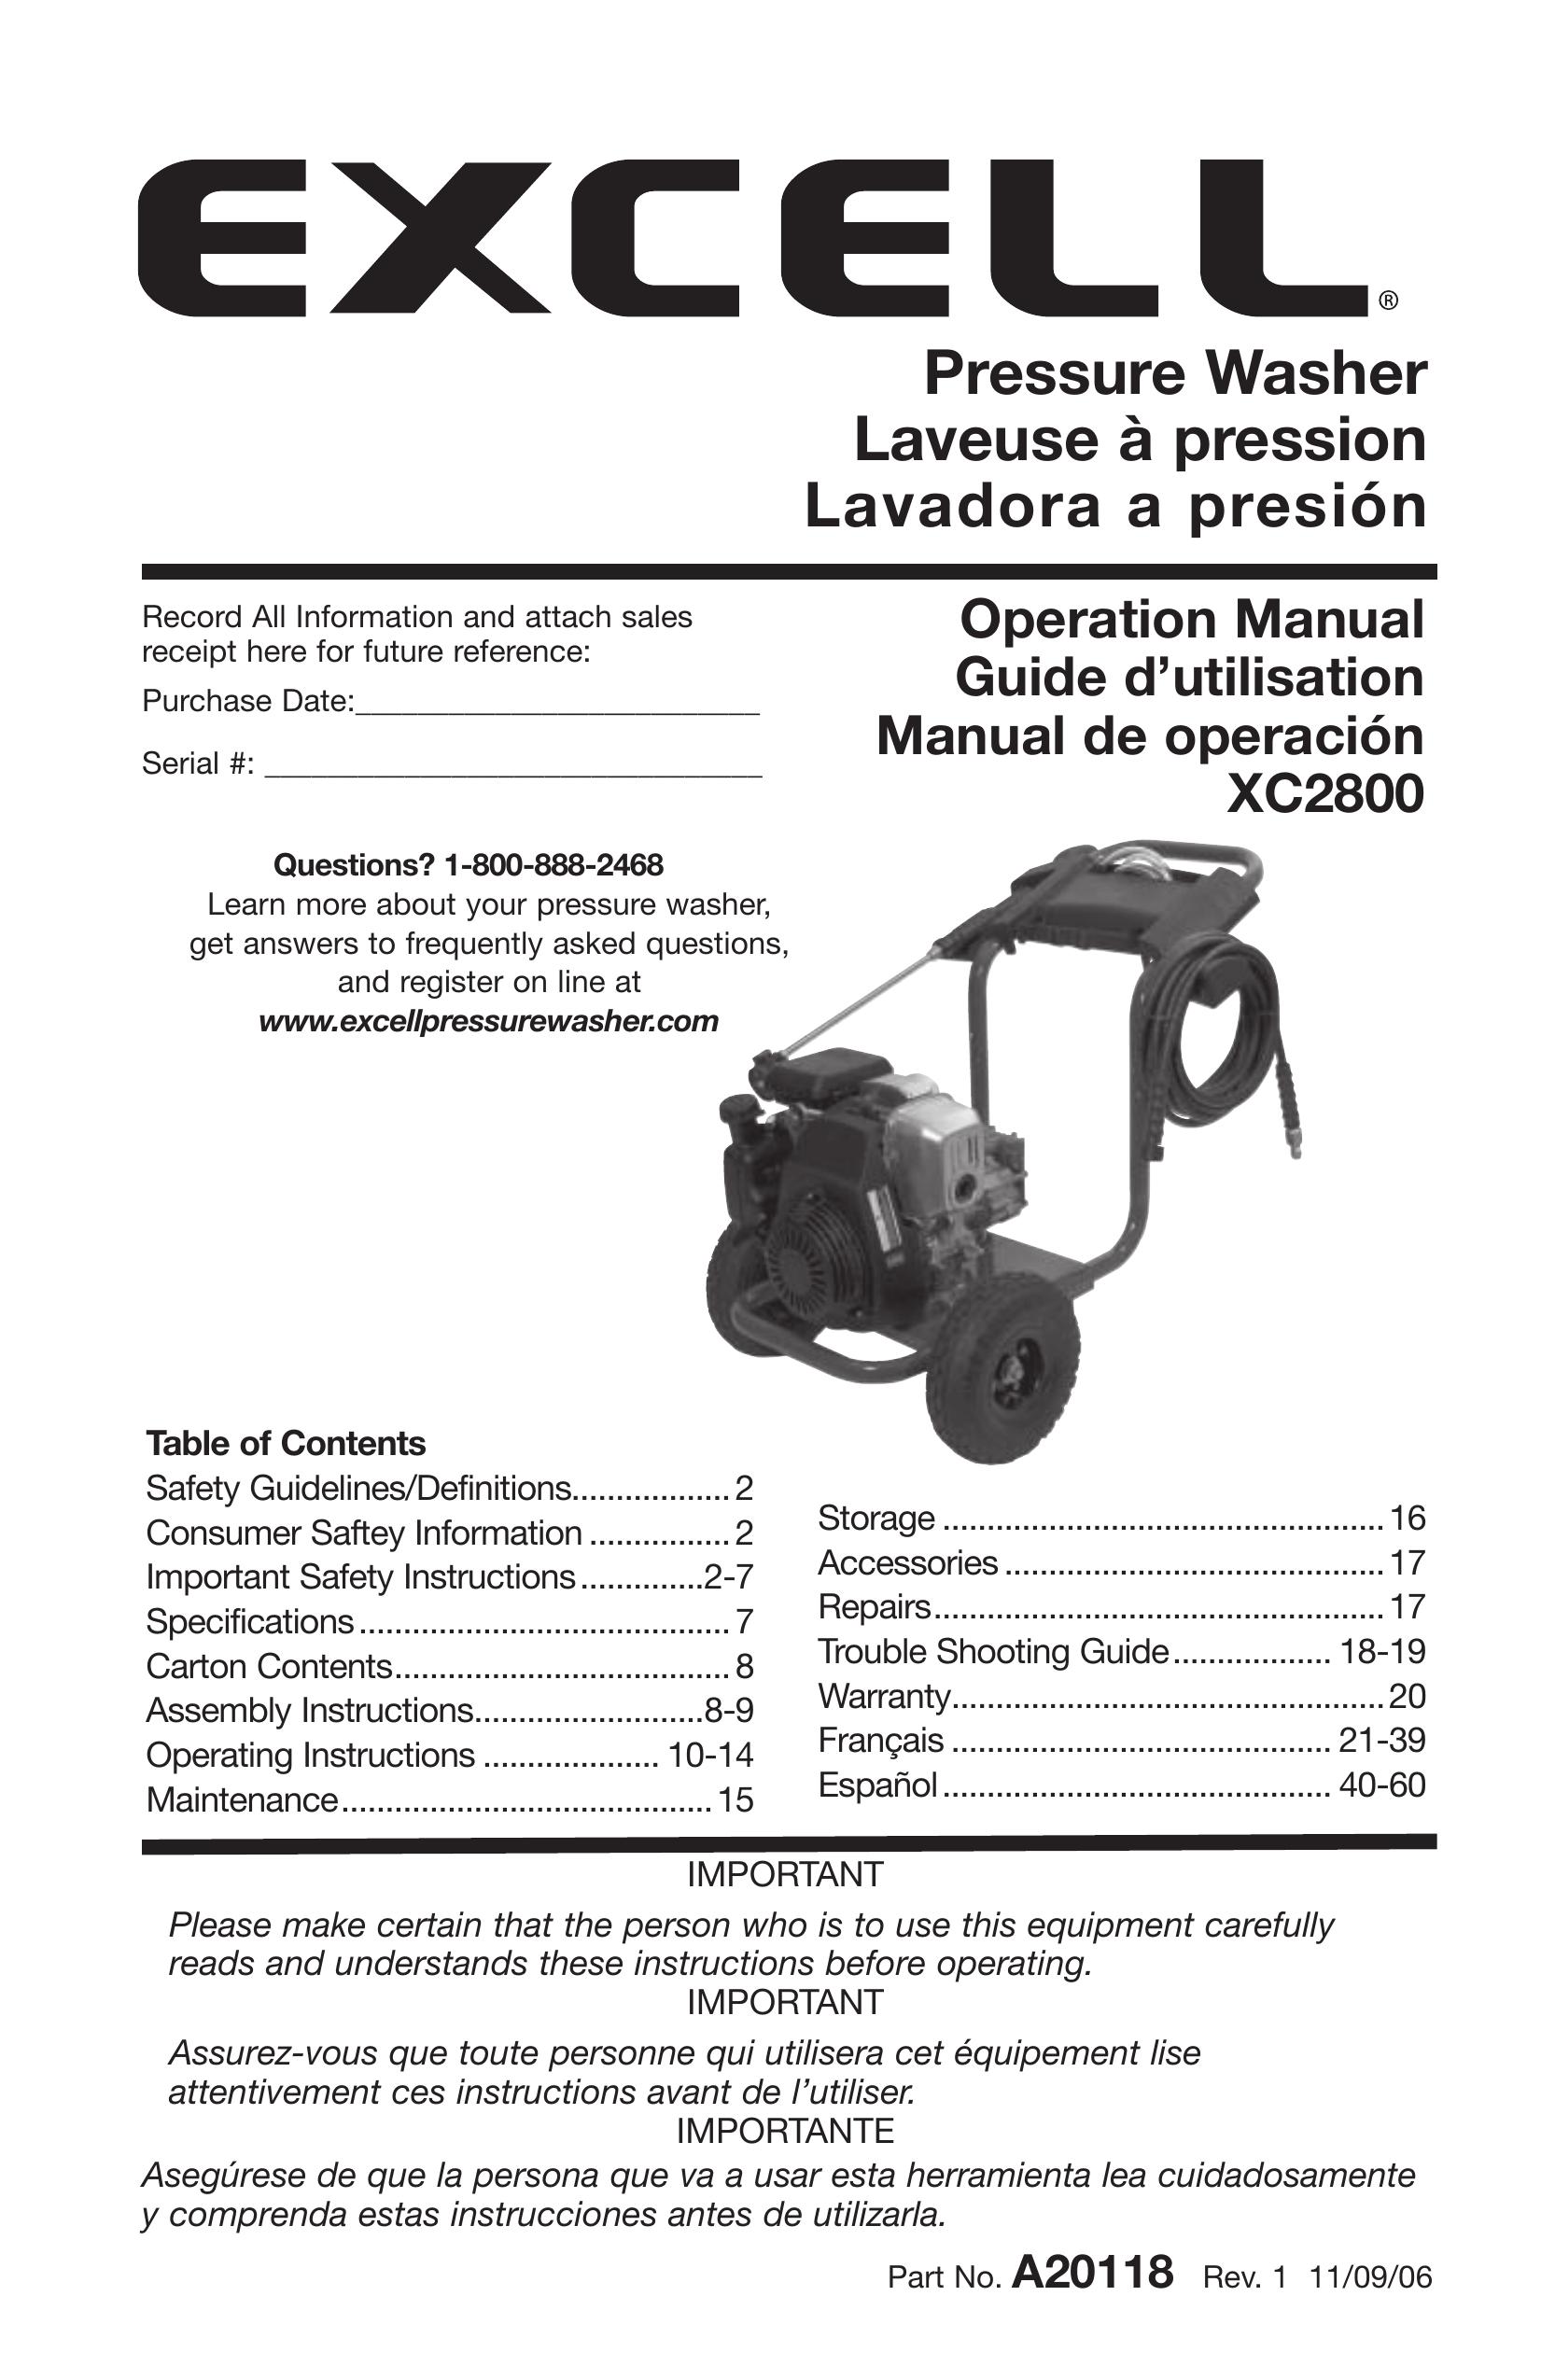 DeVillbiss Air Power Company A20118 Pressure Washer User Manual